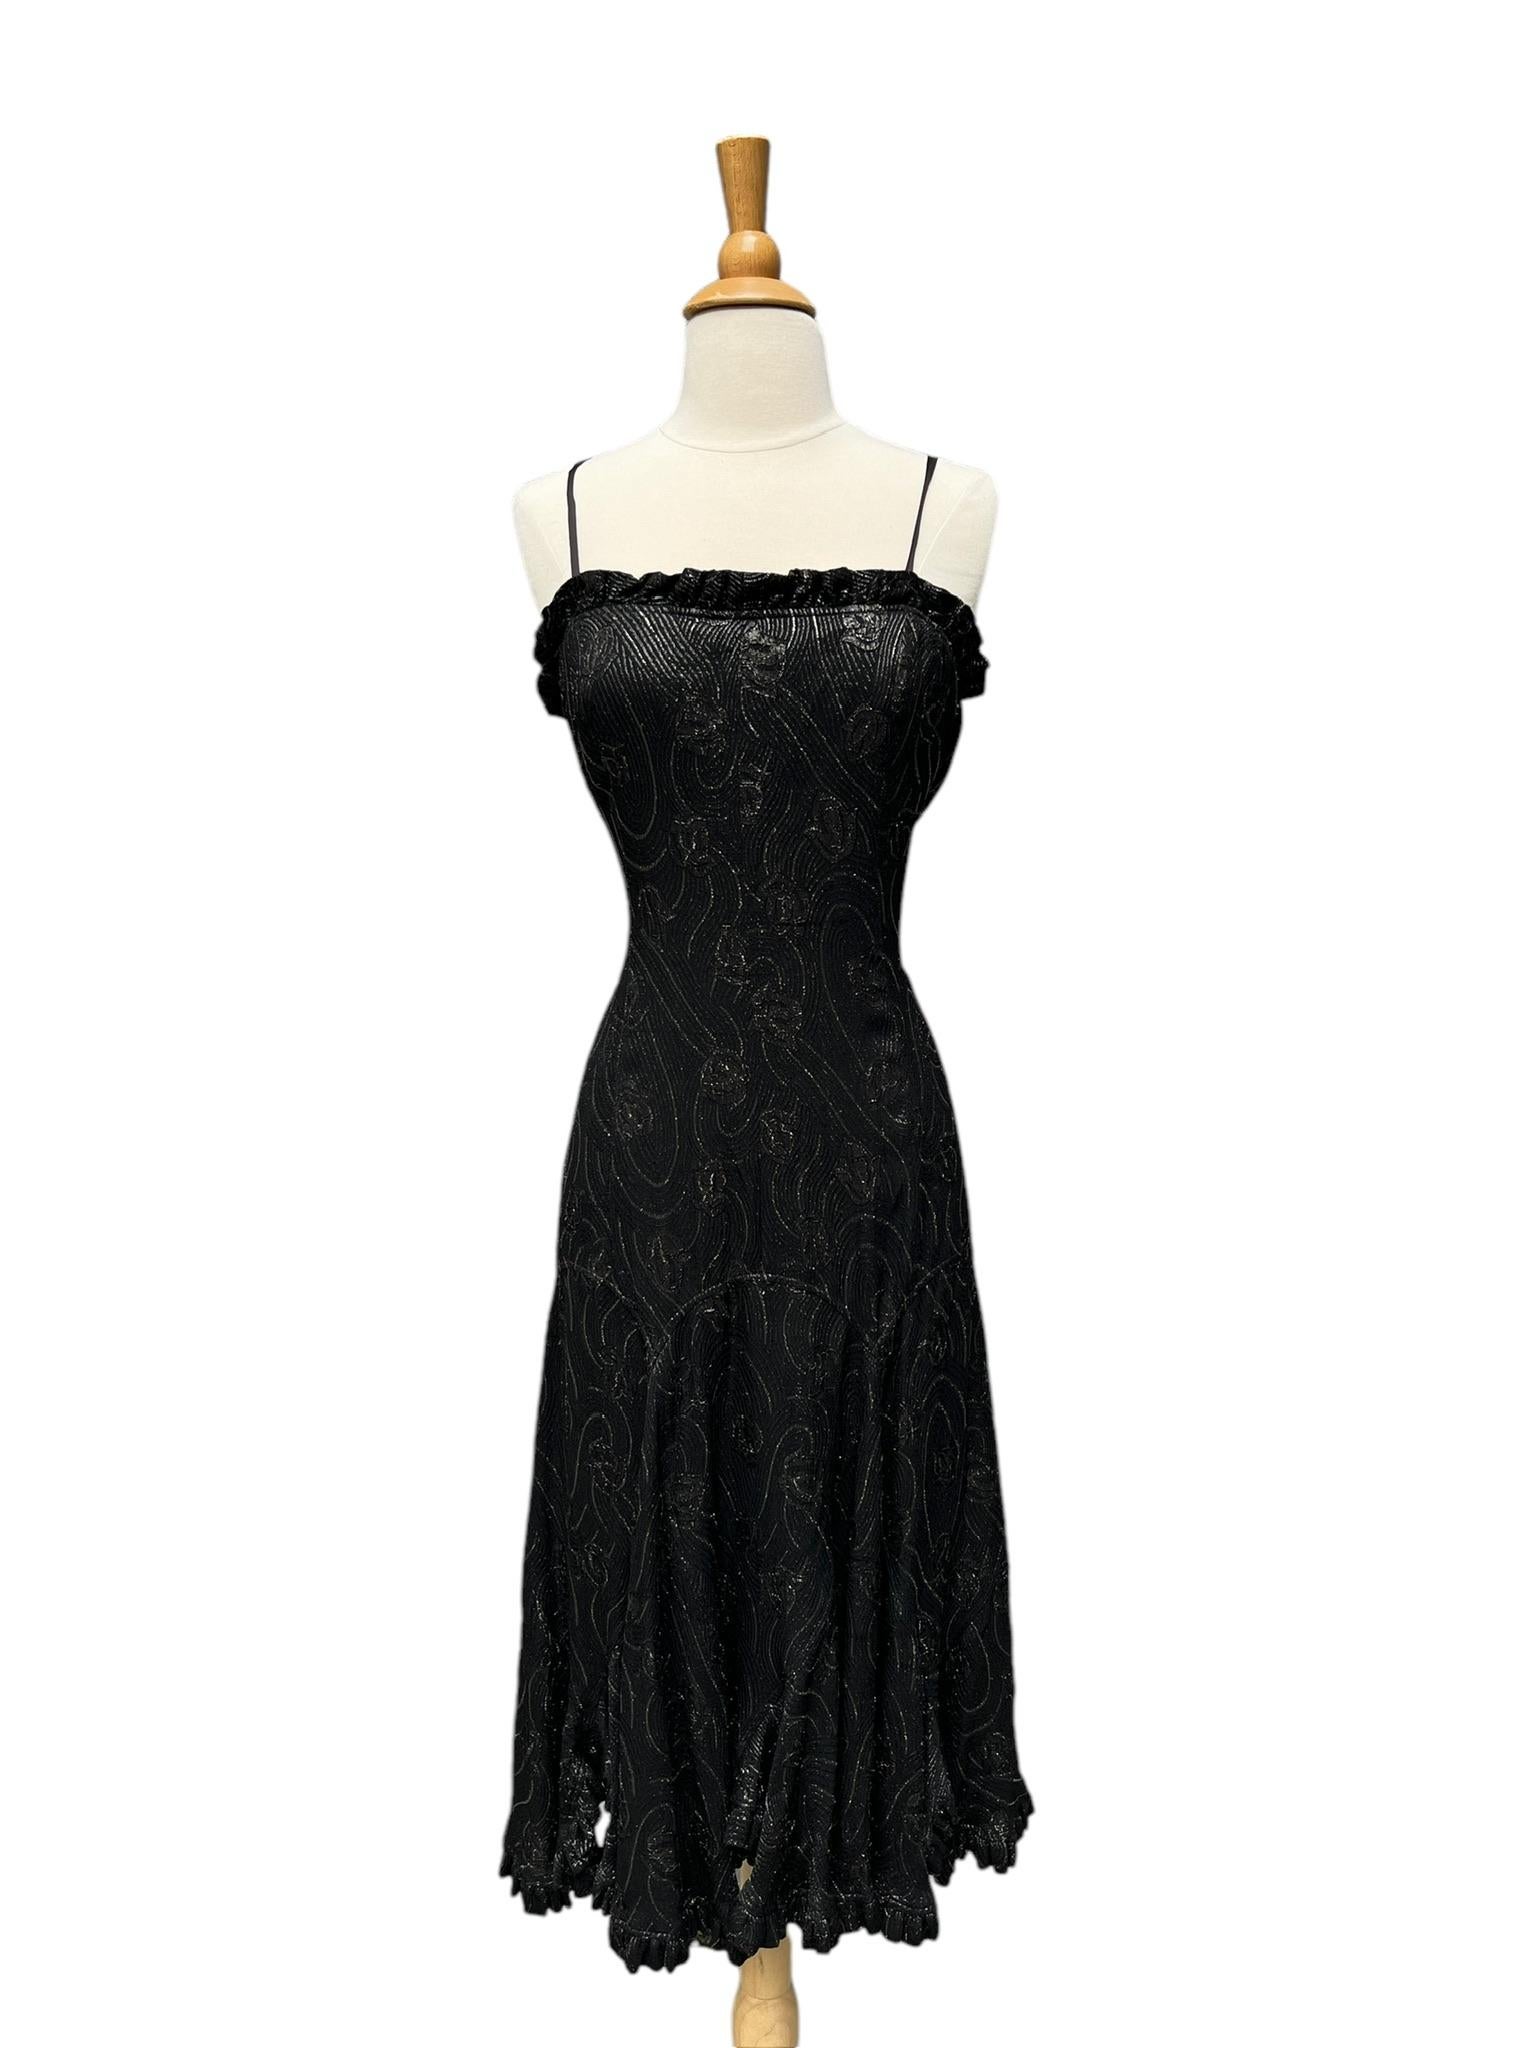 Vintage Jean Varon metallic dress.

This dress is a beautiful dark raisin or licorice (brownish black) with bronze lurex thread throughout. Swirl and floral pattern. Straight silhouette with flouncy ruffled hem. The bodice has an interior built in